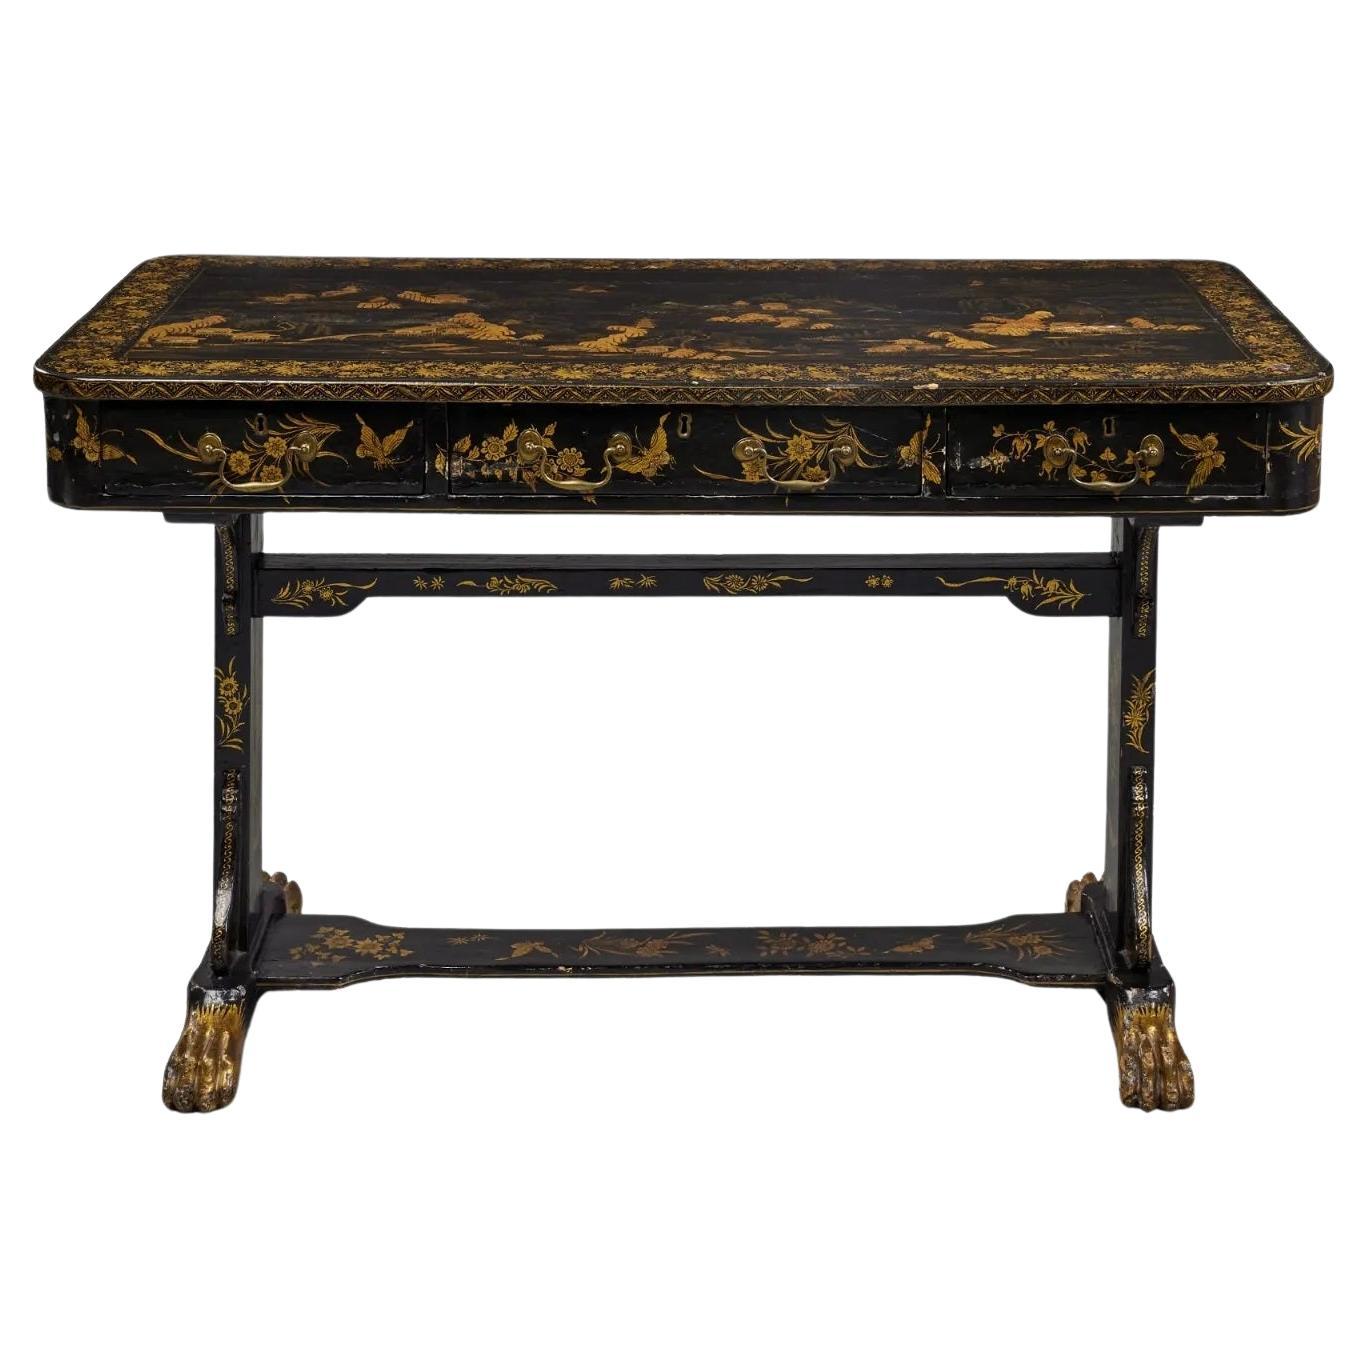 A Chinese Export Black and Gold Lacquer Desk